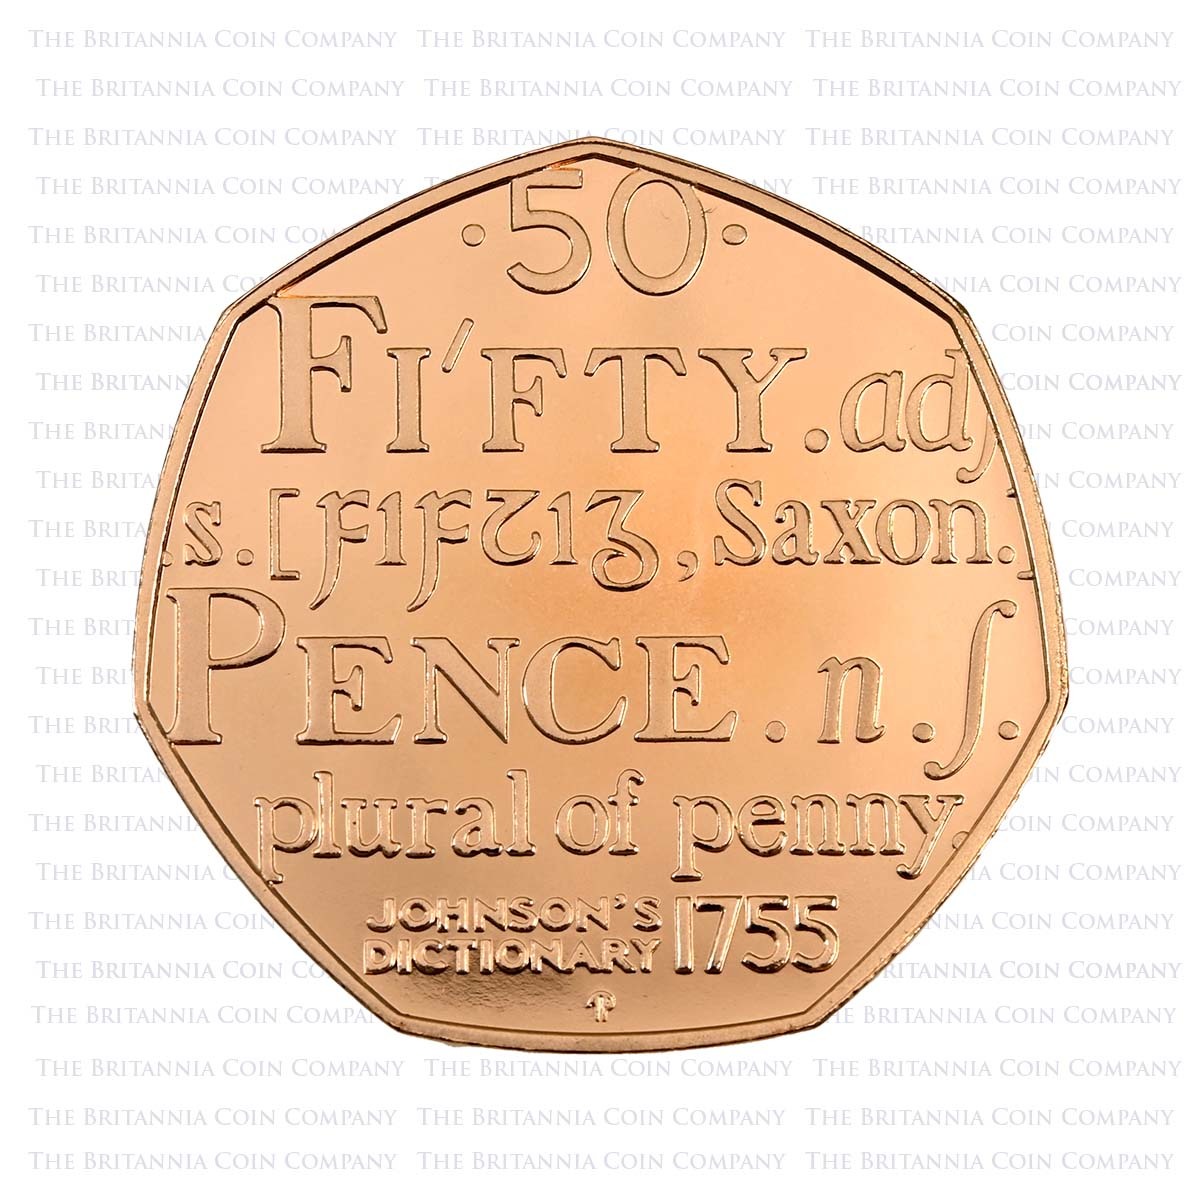 UKSJGP 2005 Samuel Johnson's Dictionary Fifty Pence Gold Proof Coin Reverse